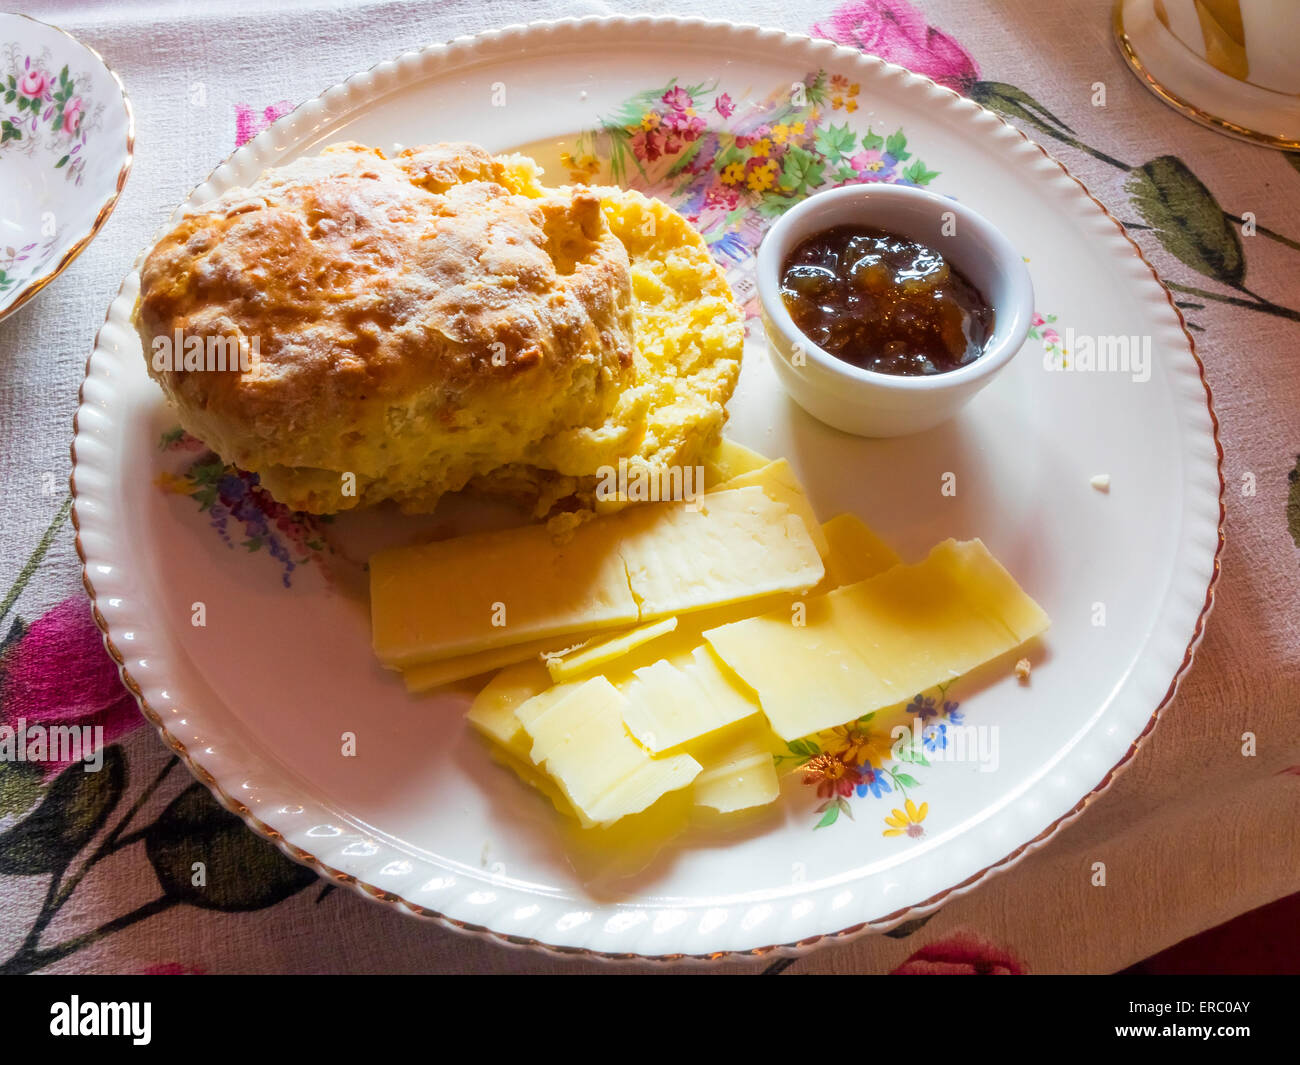 A serving of a Scone with Cheddar cheese slices and Chutney on a floral plate and tablecloth Stock Photo